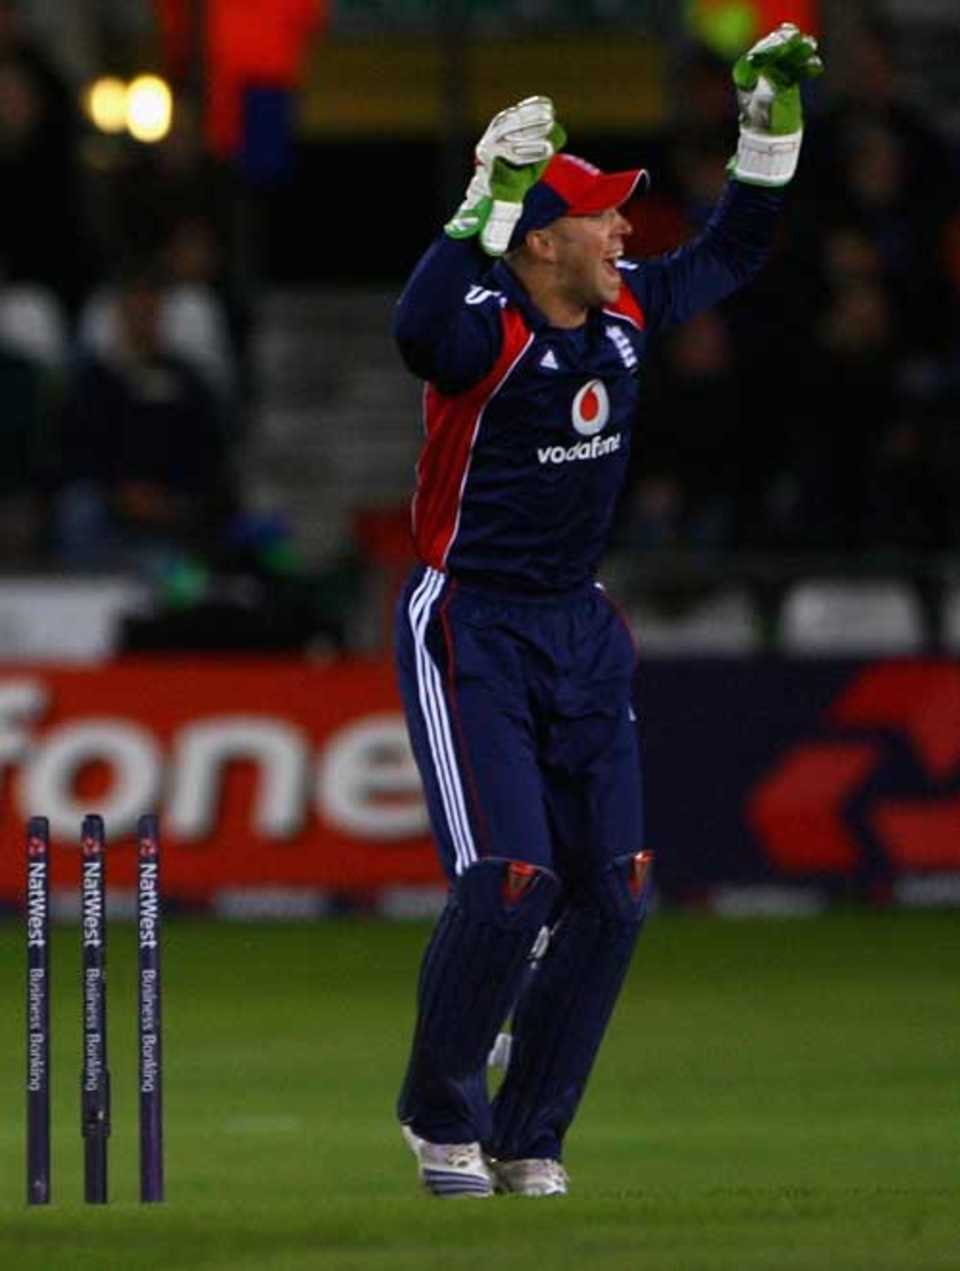 Matt Prior appeals for a stumping, England v South Africa, NatWest Series, first ODI, Headingley, August 22, 2008